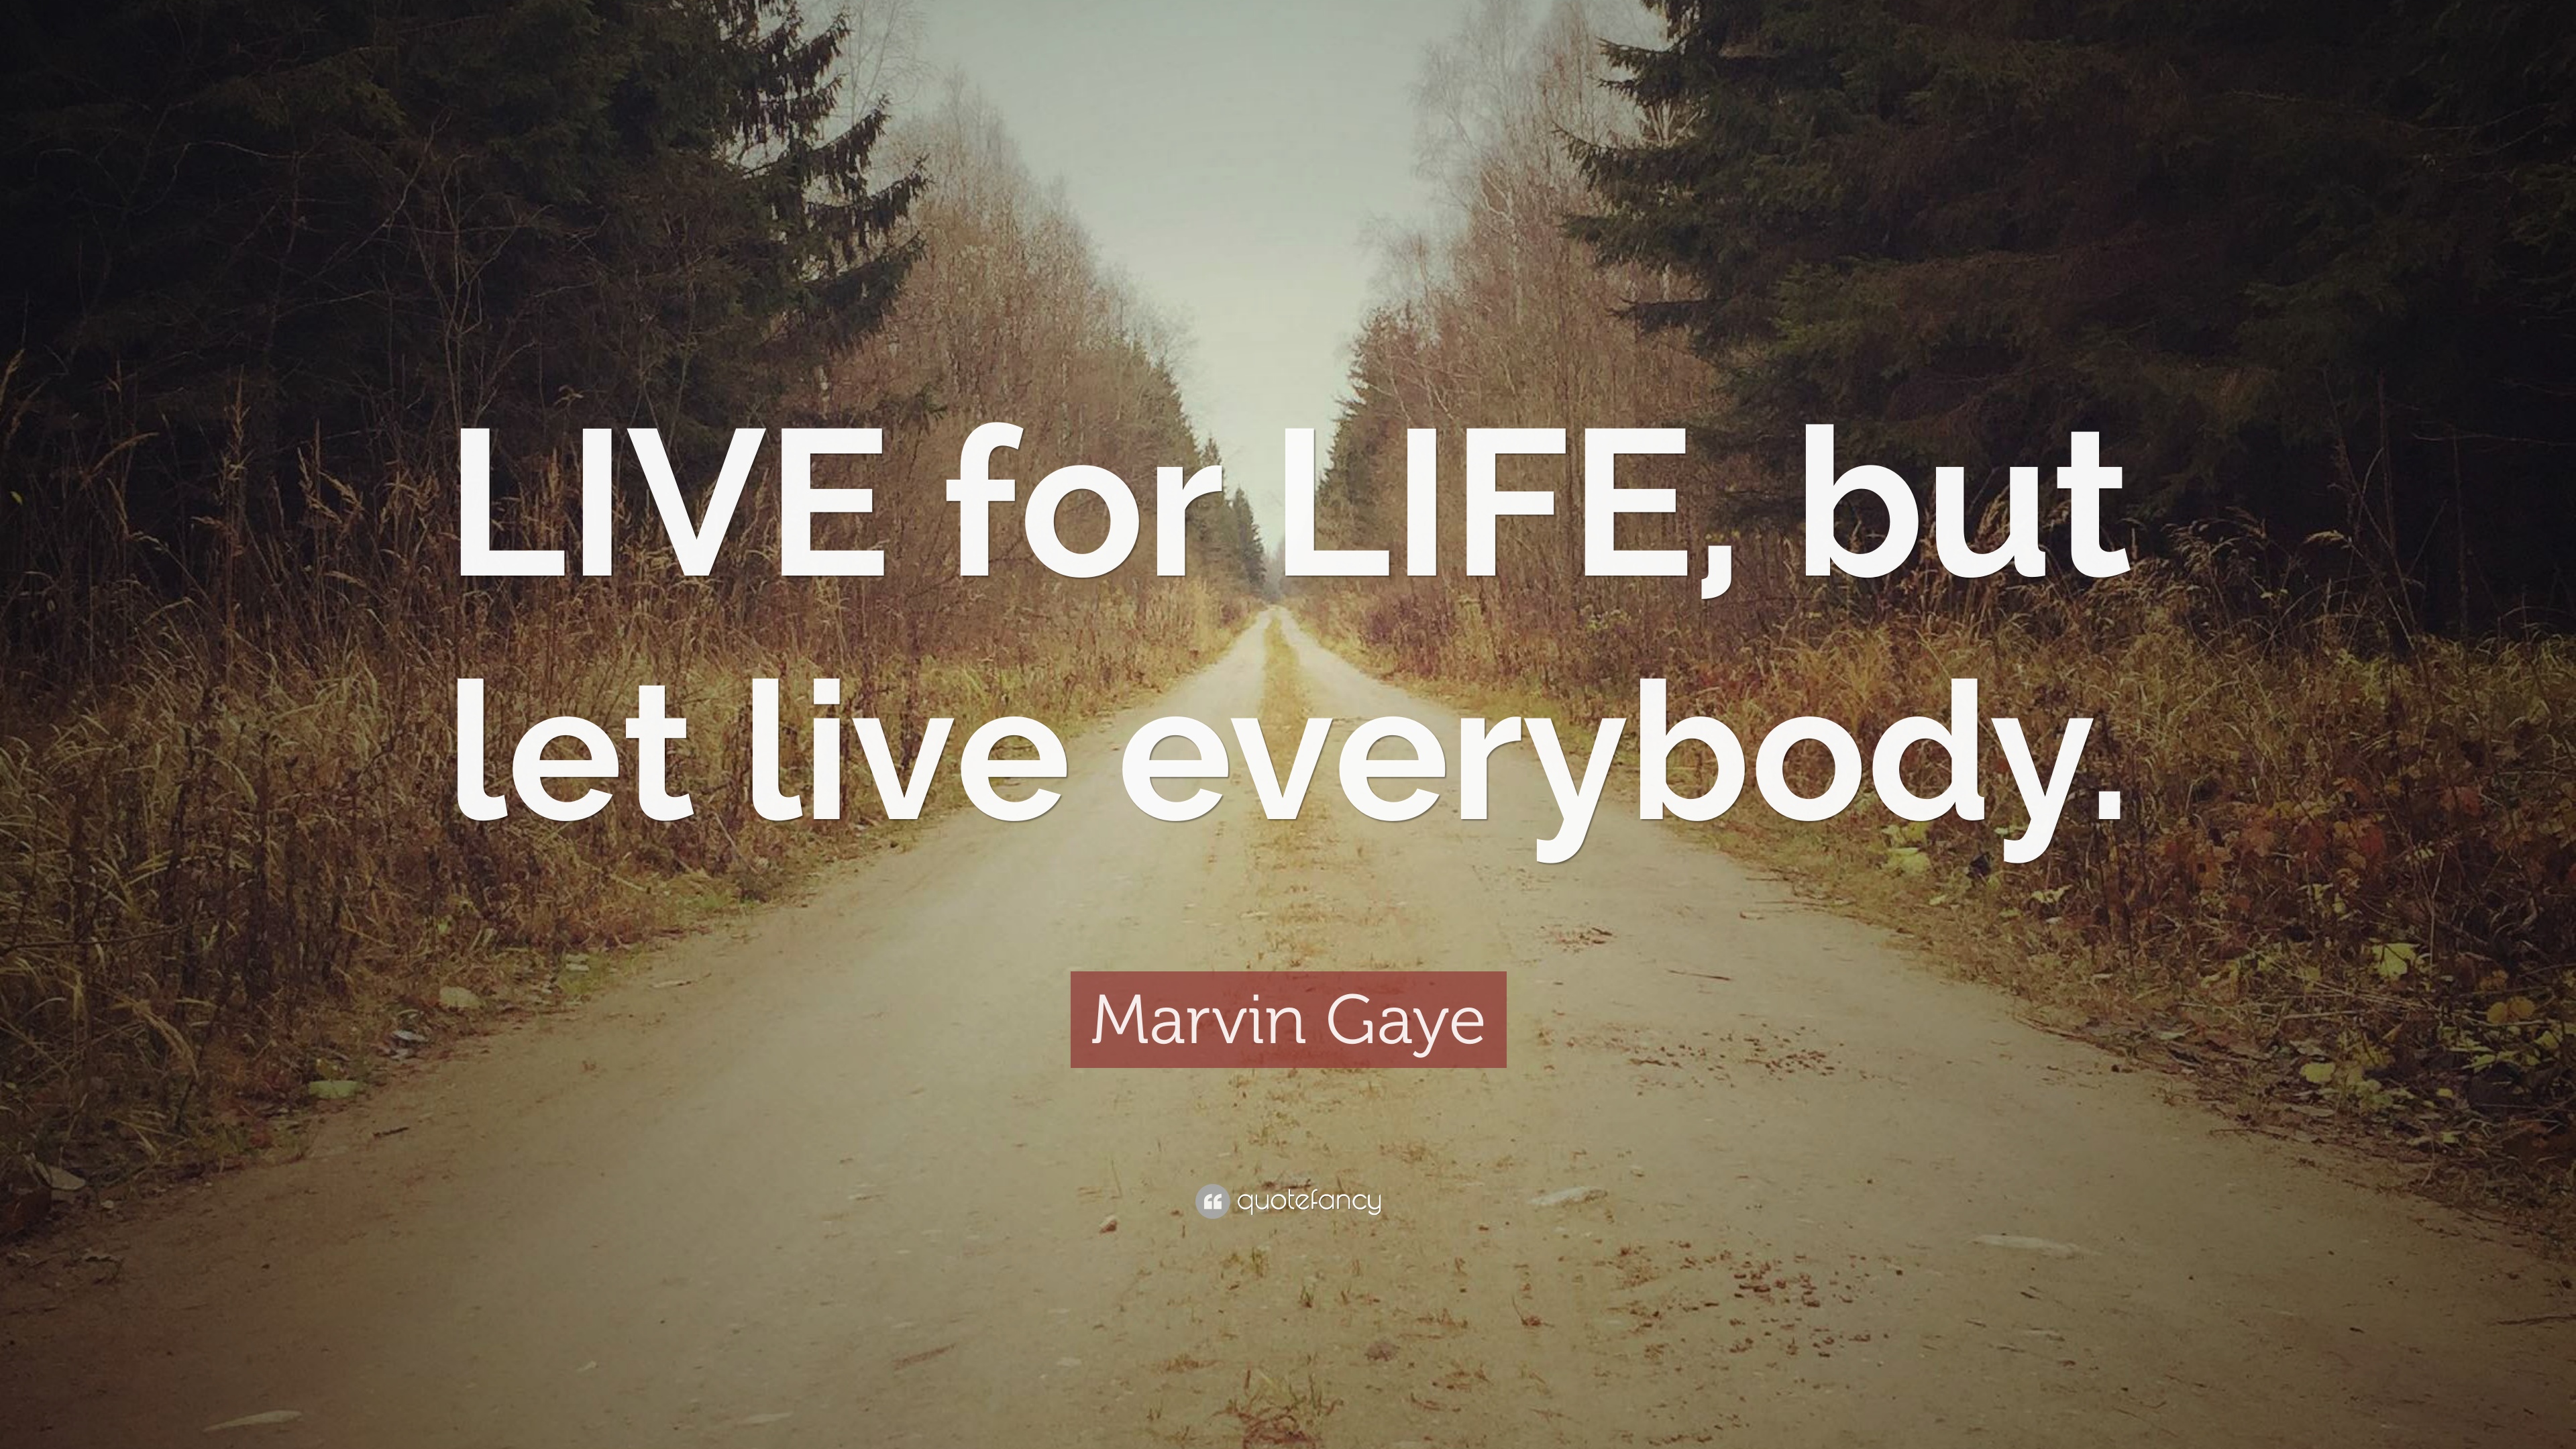 Marvin Gaye Quote: “LIVE for LIFE, but let live everybody.” 10